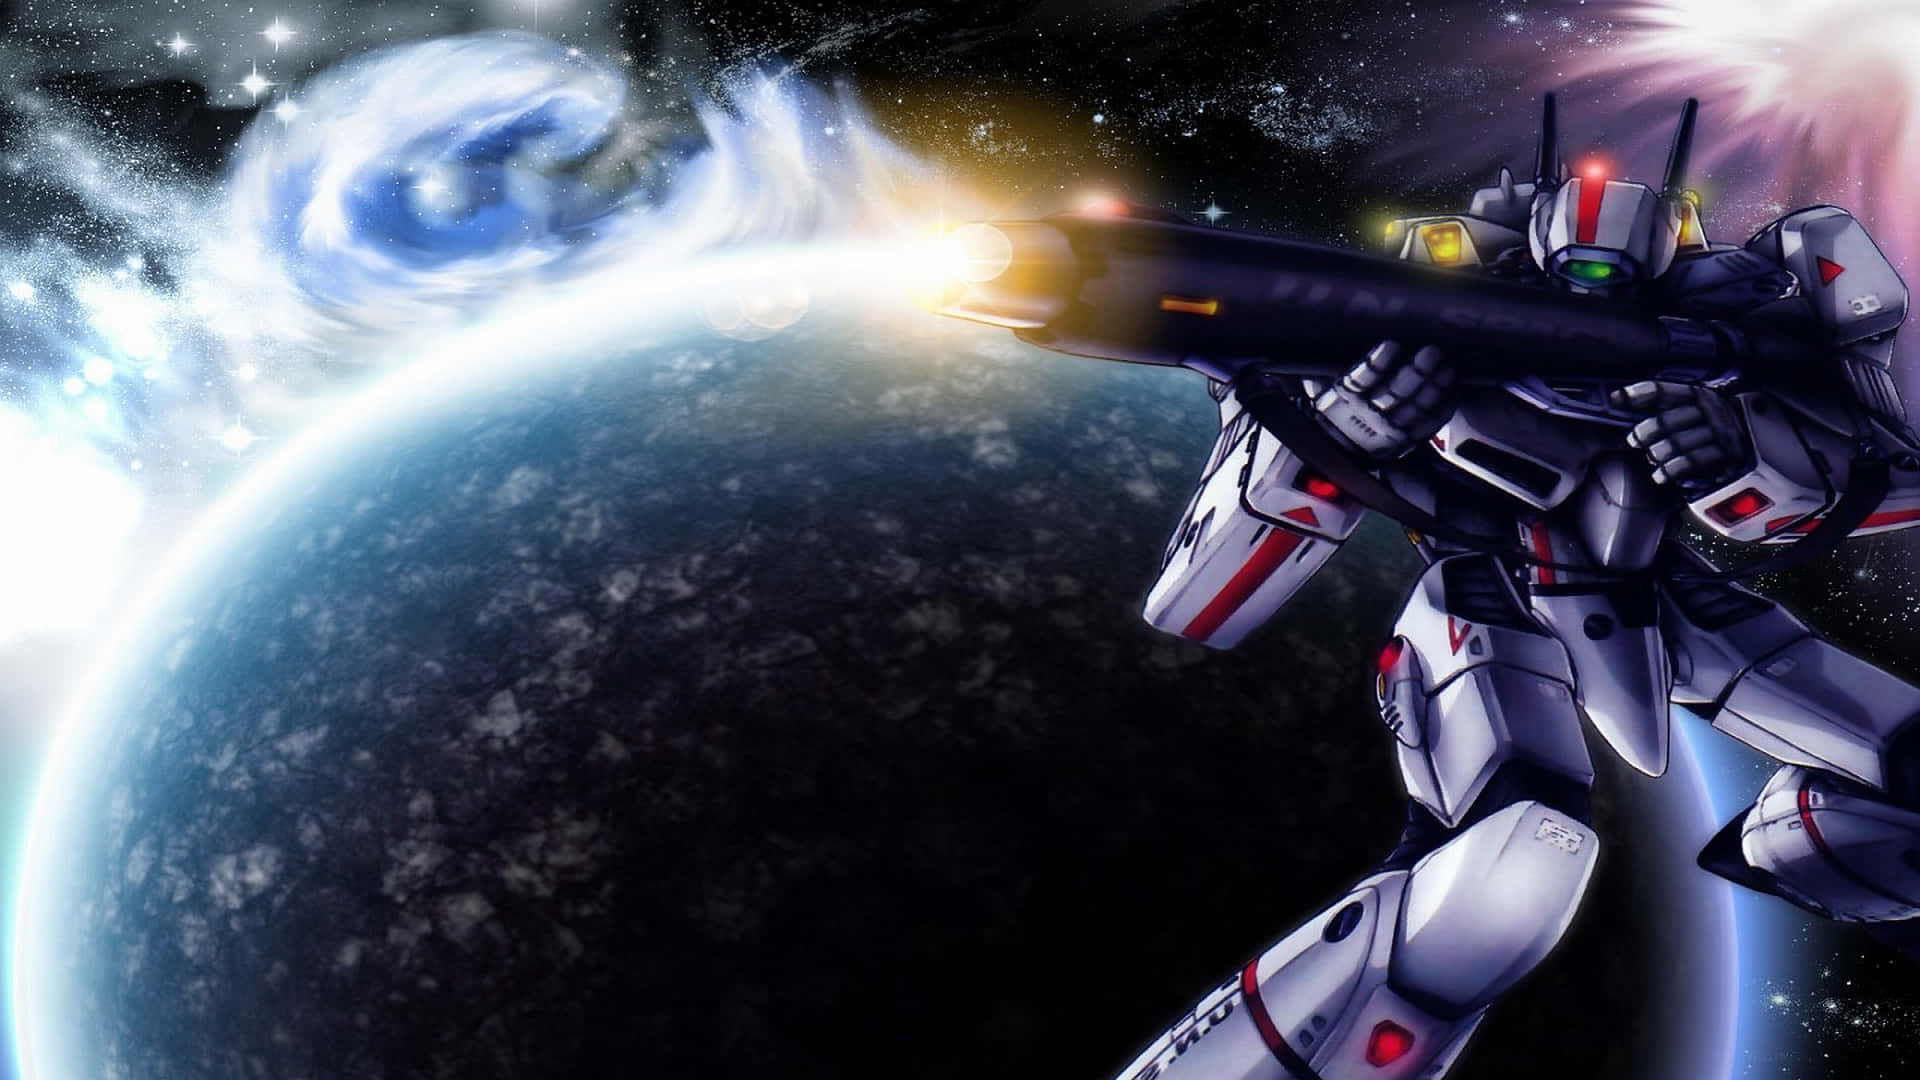 Image  "A Robot from the Robotech Universe" Wallpaper